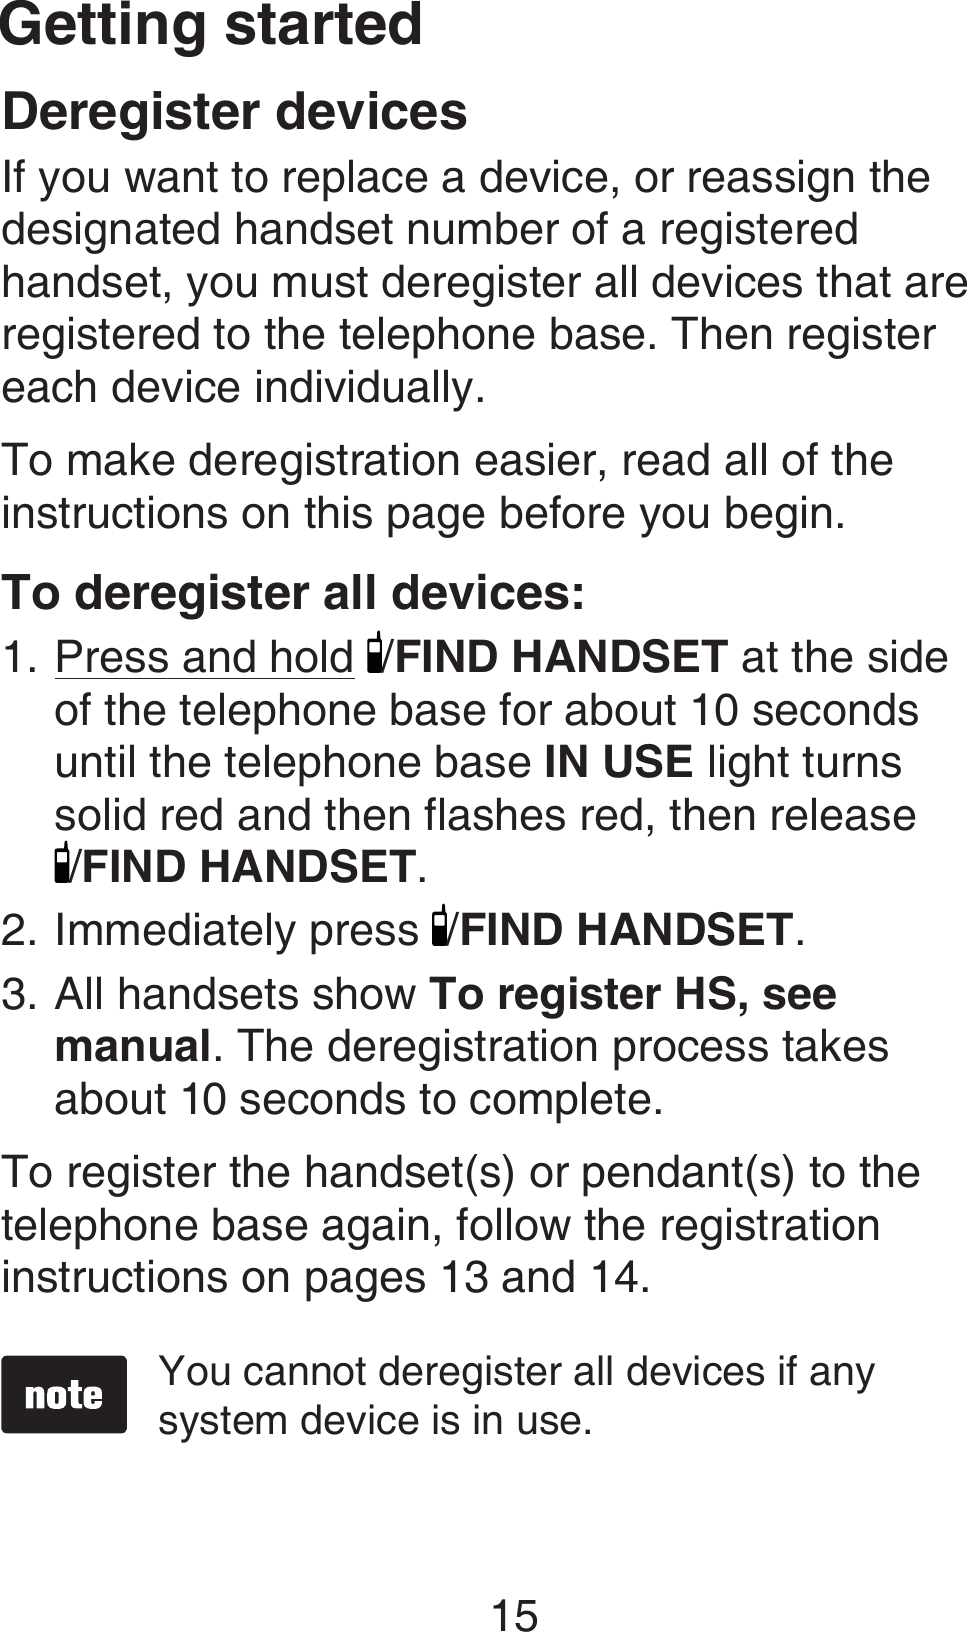 Getting started15Deregister devicesIf you want to replace a device, or reassign the designated handset number of a registered handset, you must deregister all devices that are registered to the telephone base. Then register each device individually.To make deregistration easier, read all of the instructions on this page before you begin.To deregister all devices:Press and hold /FIND HANDSET at the side of the telephone base for about 10 seconds until the telephone base IN USE light turns solid red and then flashes red, then release  /FIND HANDSET.Immediately press  /FIND HANDSET. All handsets show To register HS, see manual. The deregistration process takes about 10 seconds to complete. To register the handset(s) or pendant(s) to the telephone base again, follow the registration instructions on pages 13 and 14.You cannot deregister all devices if any system device is in use.1.2.3.